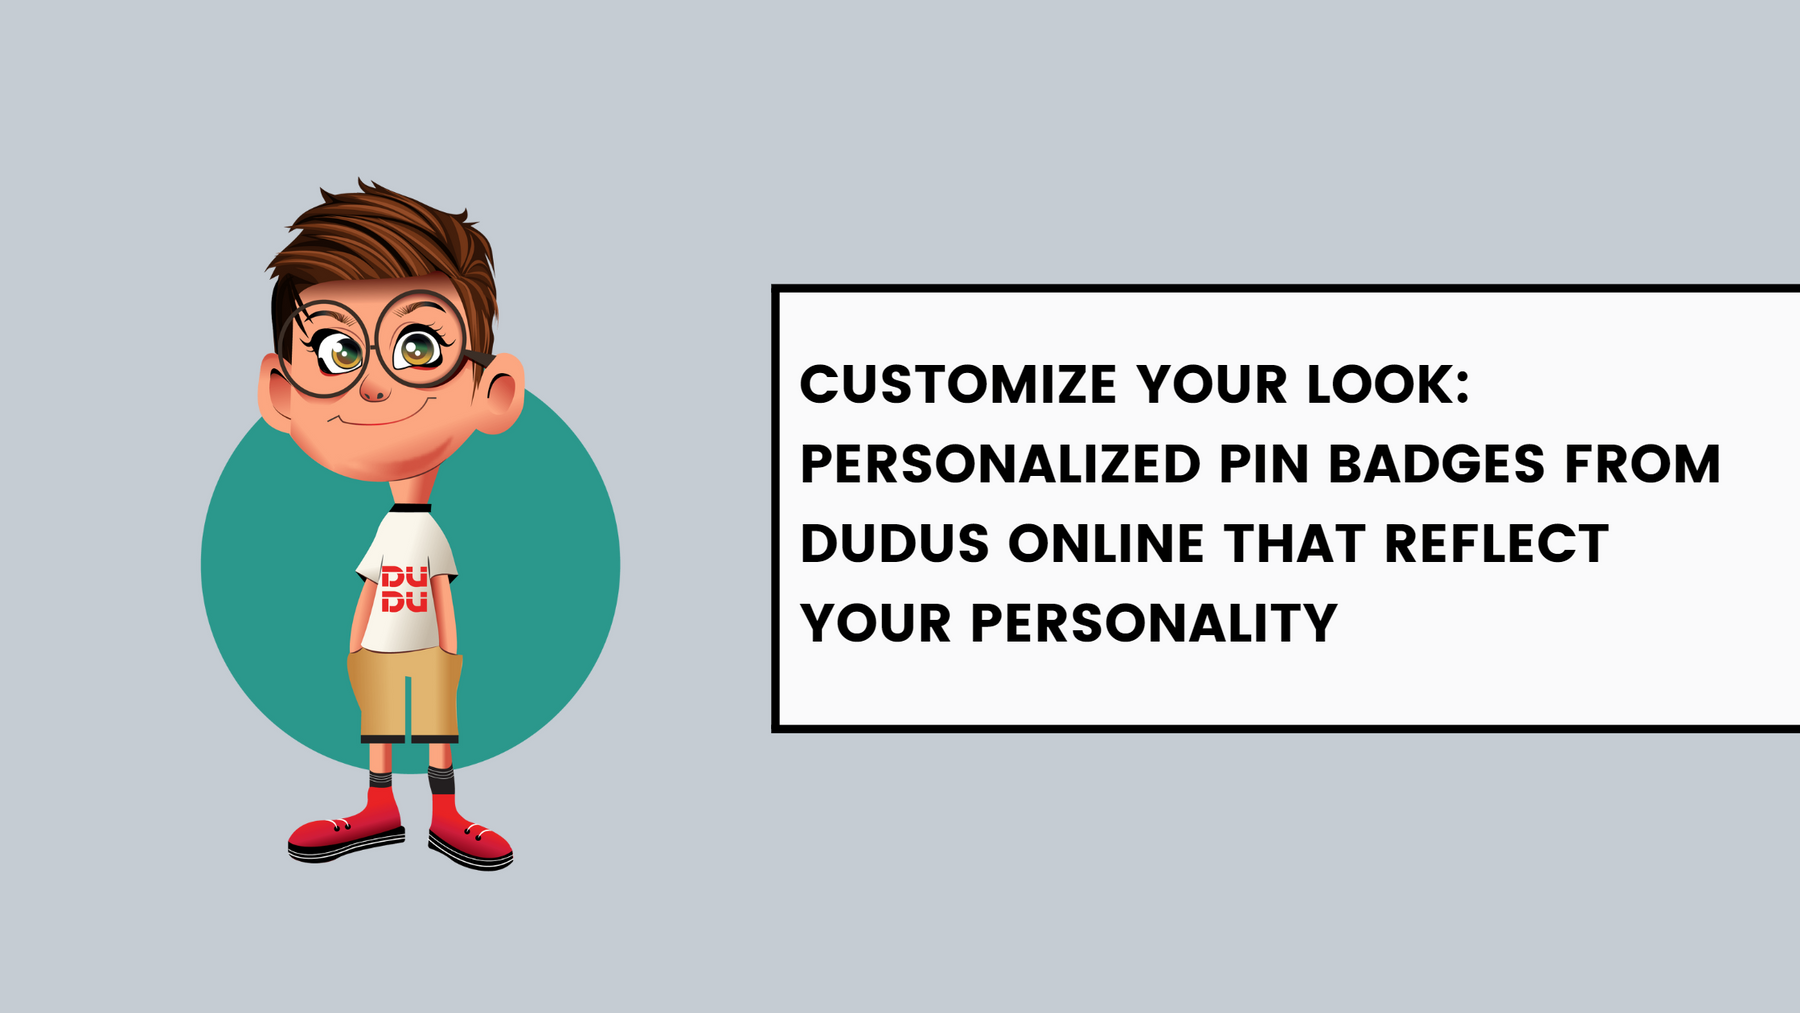 Customize Your Look: Personalized Pin Badges From Dudus Online That Reflect Your Personality